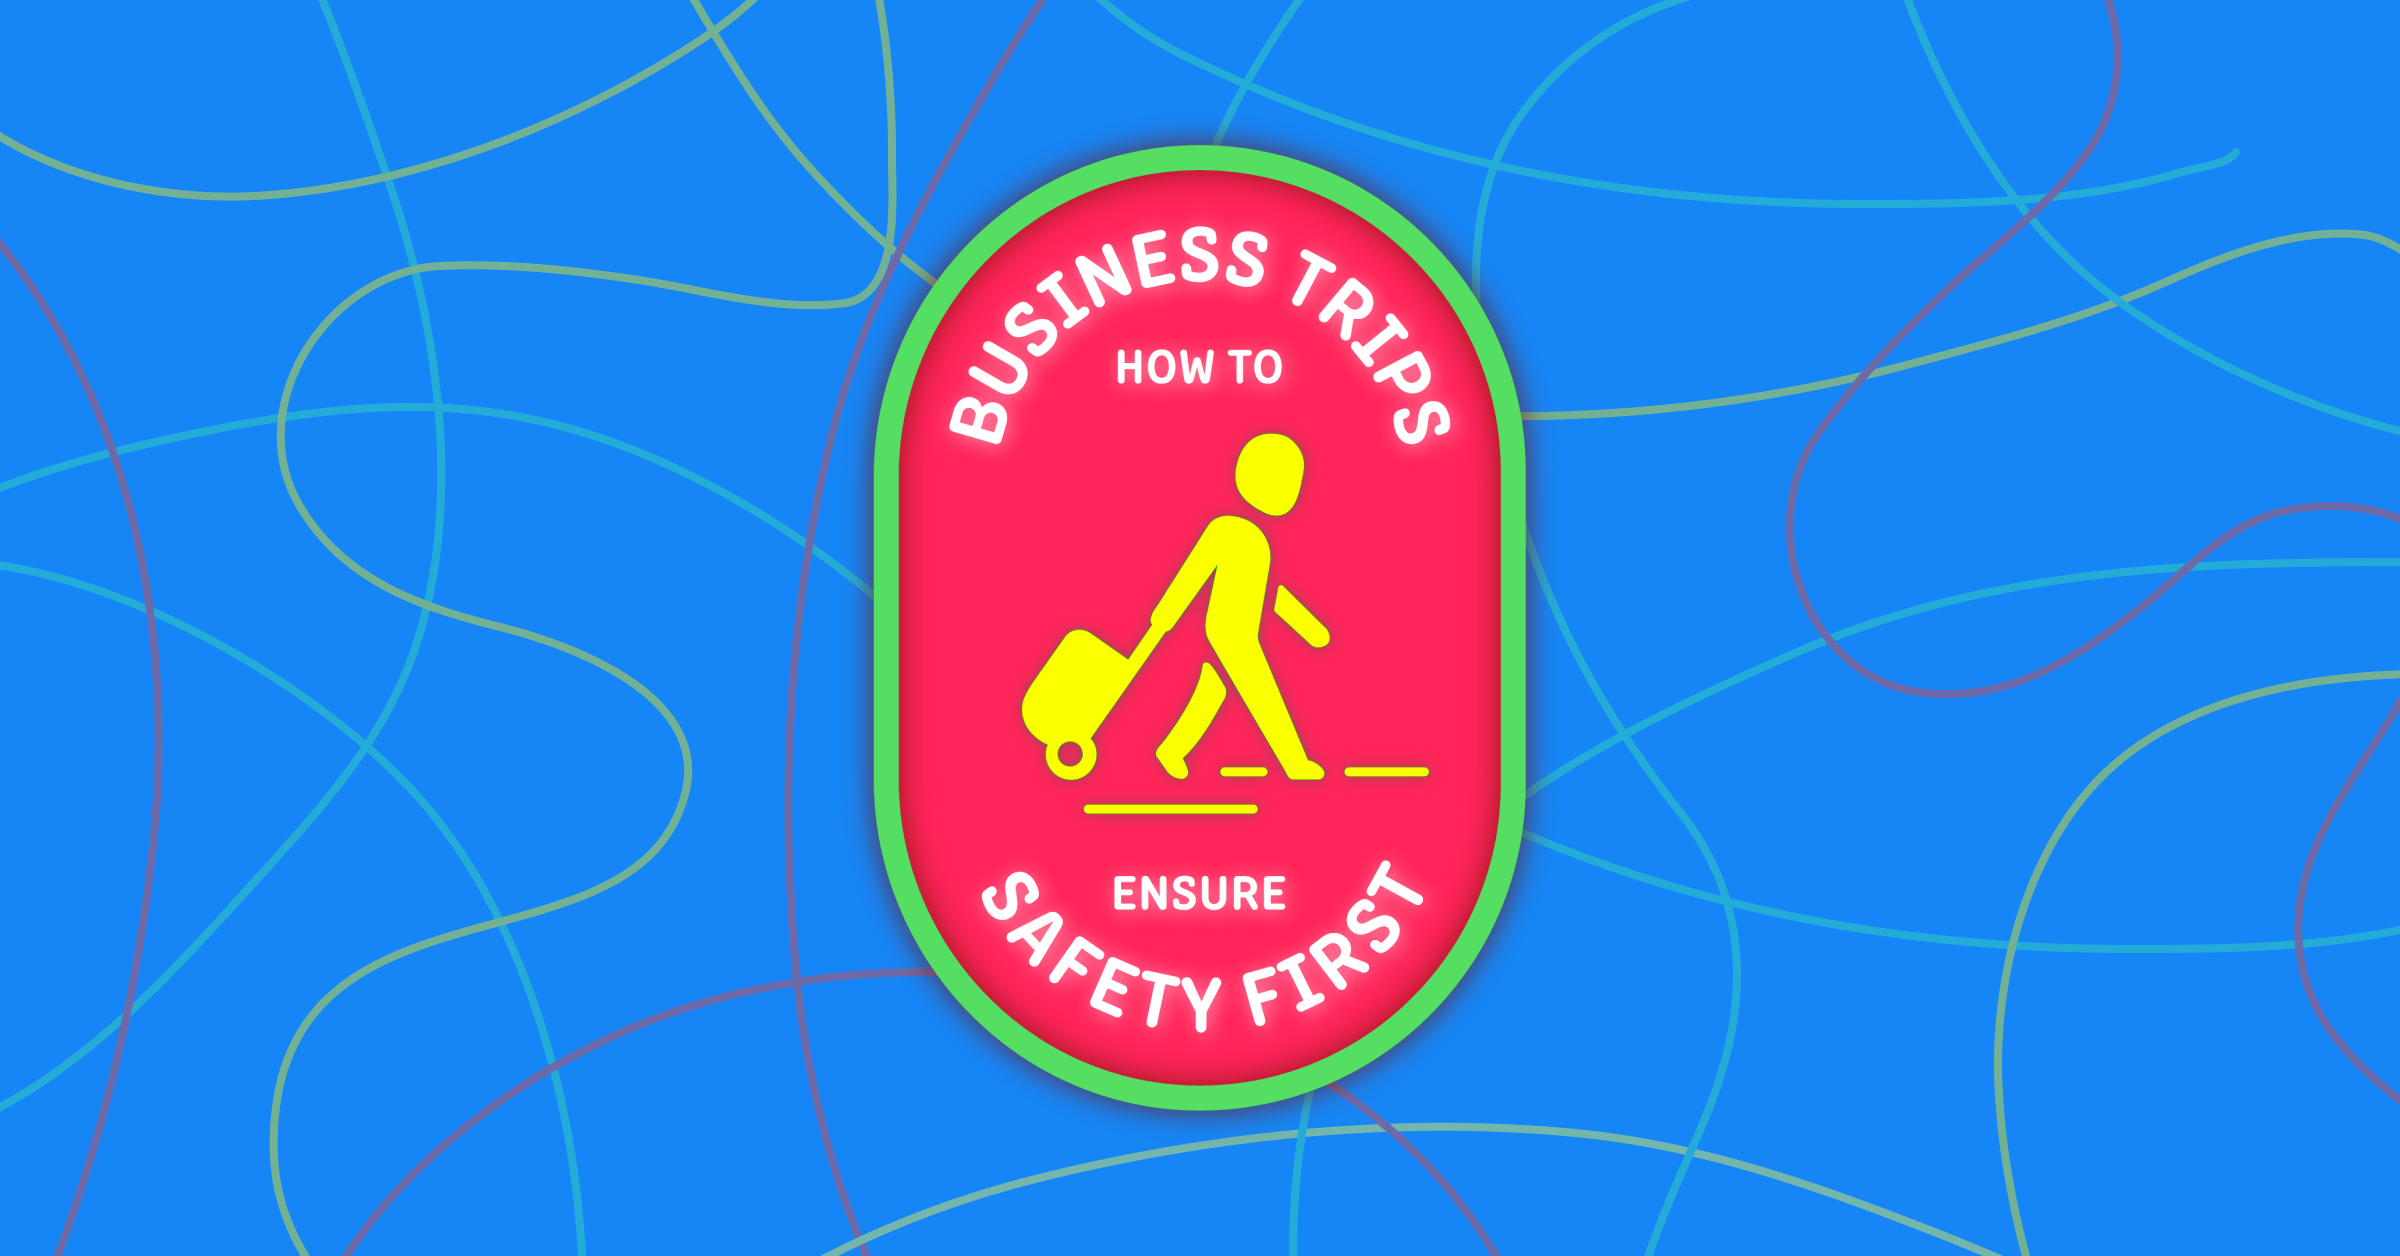 How To Ensure Employee Safety On Business Trips